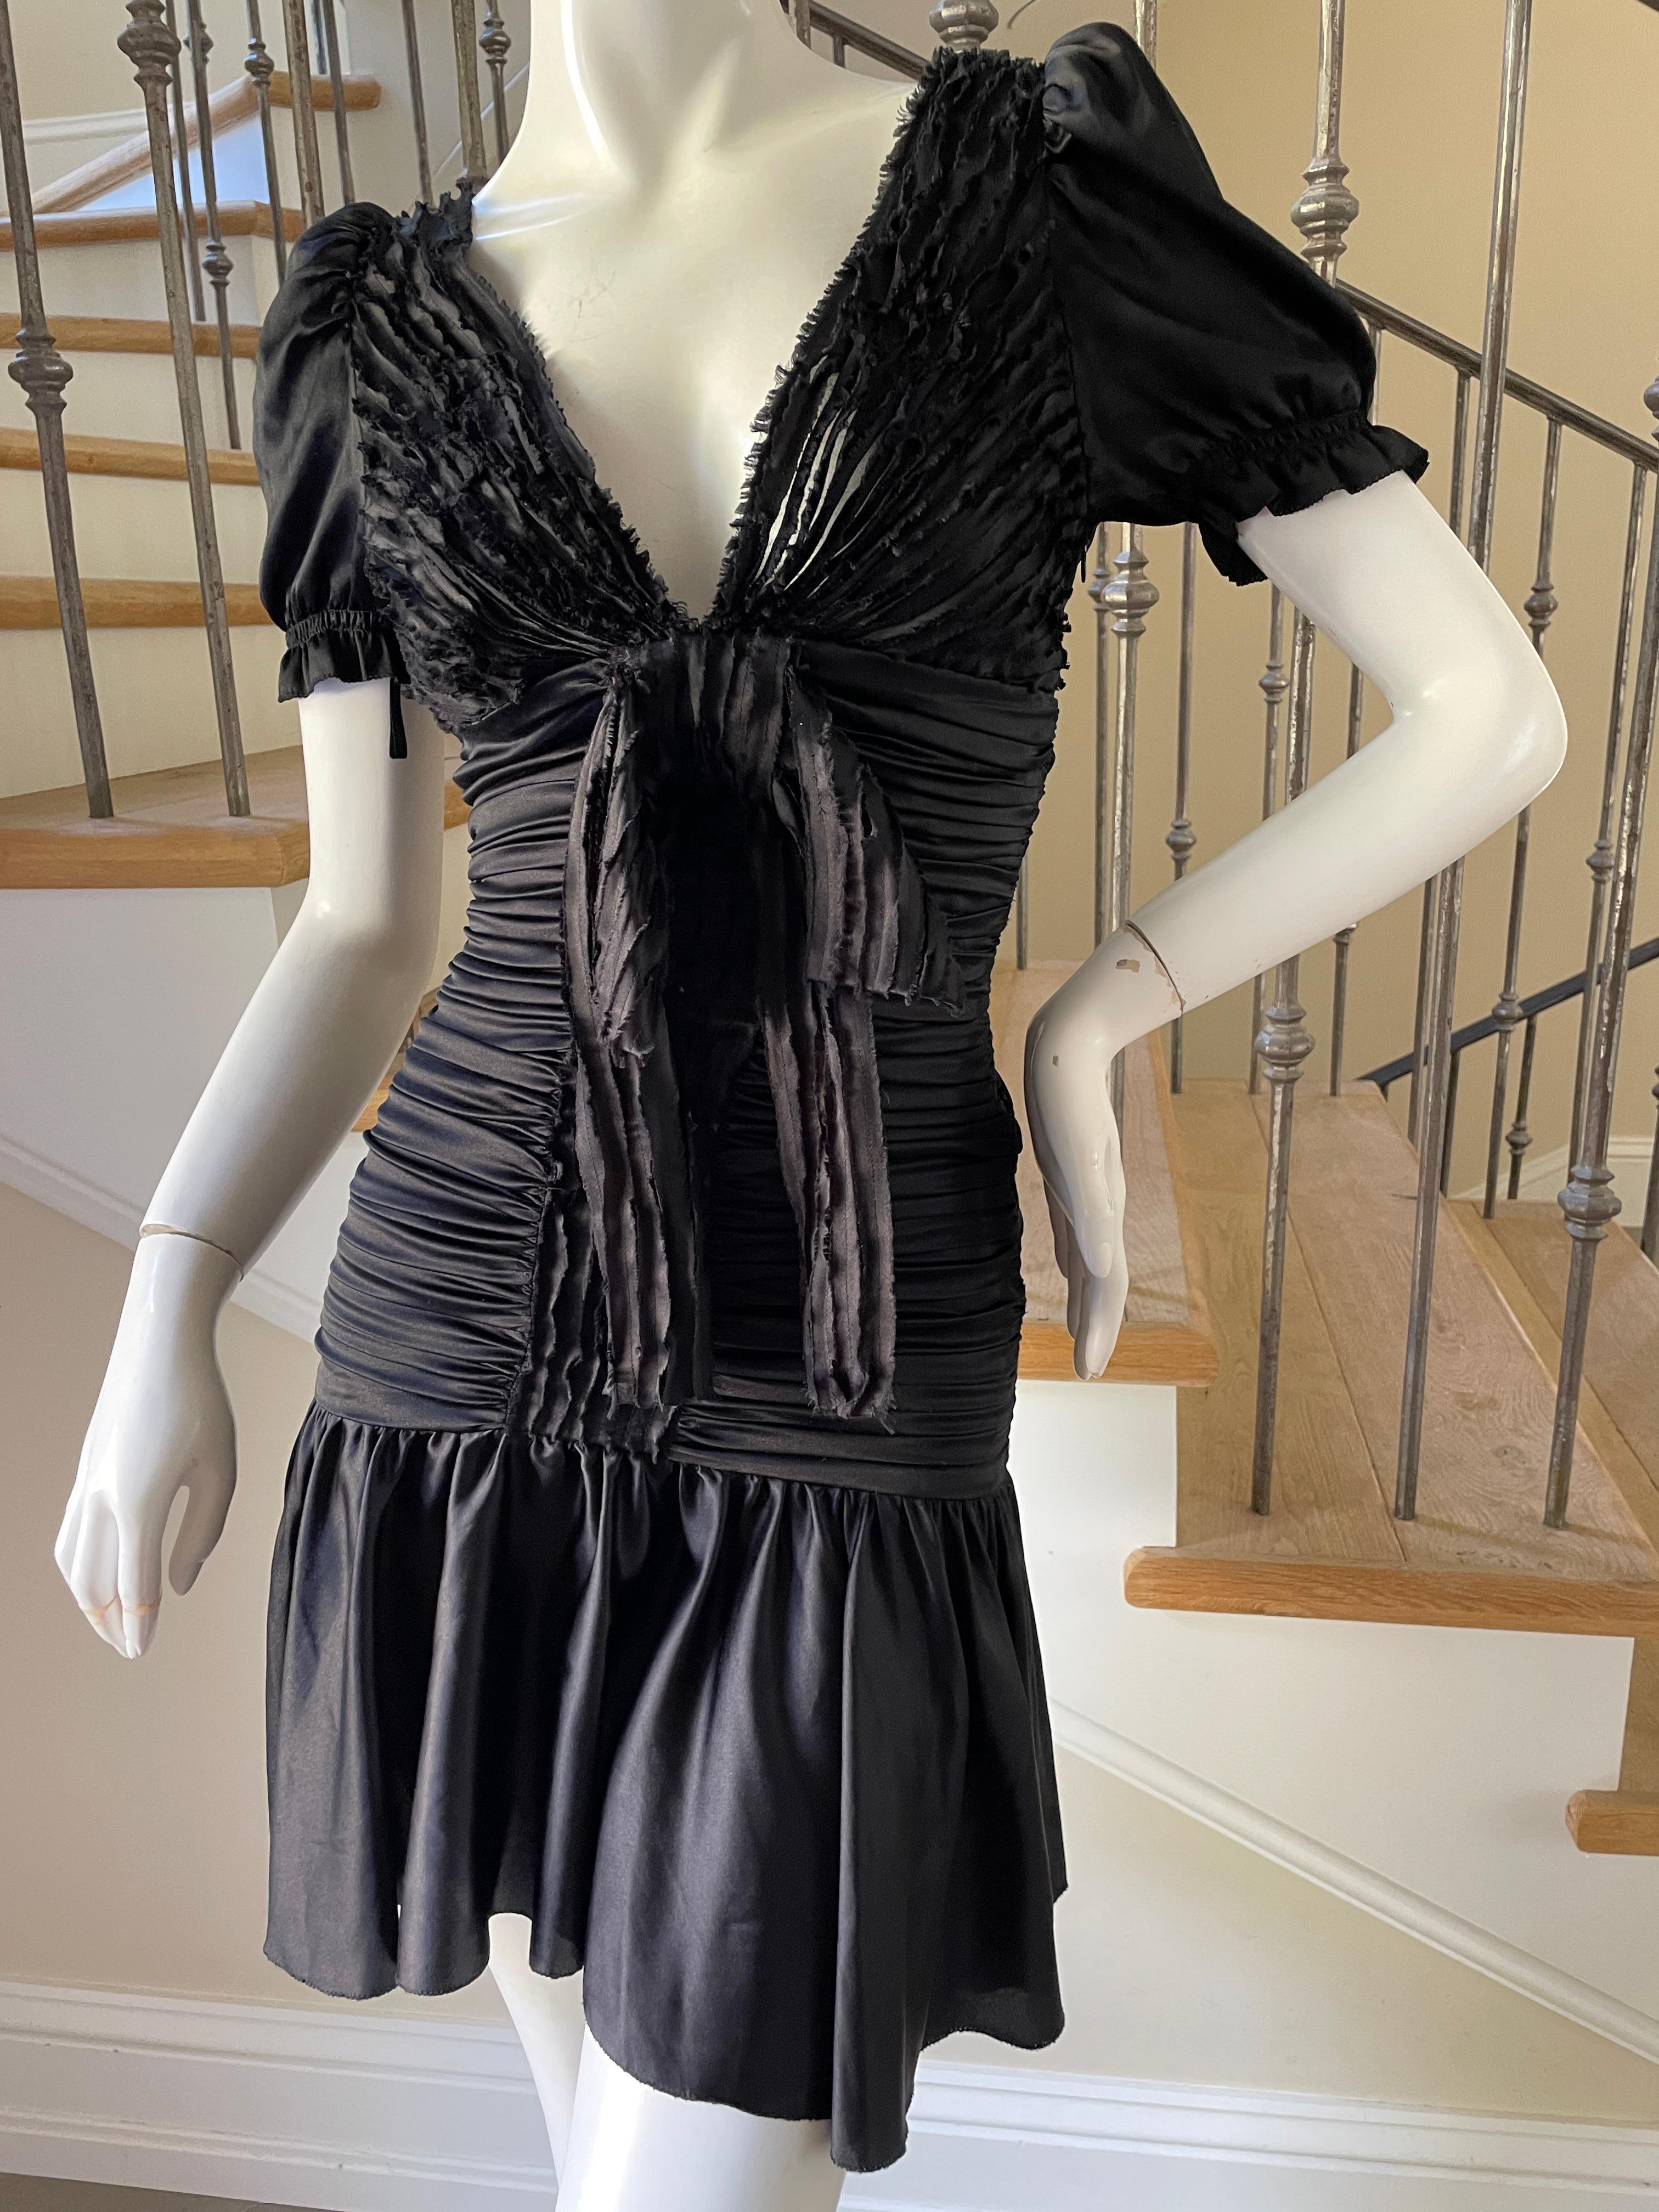 D&G by Dolce & Gabbana Vintage Black Silk Pleated Plunging Mini Dress
Size 38
  Bust 34